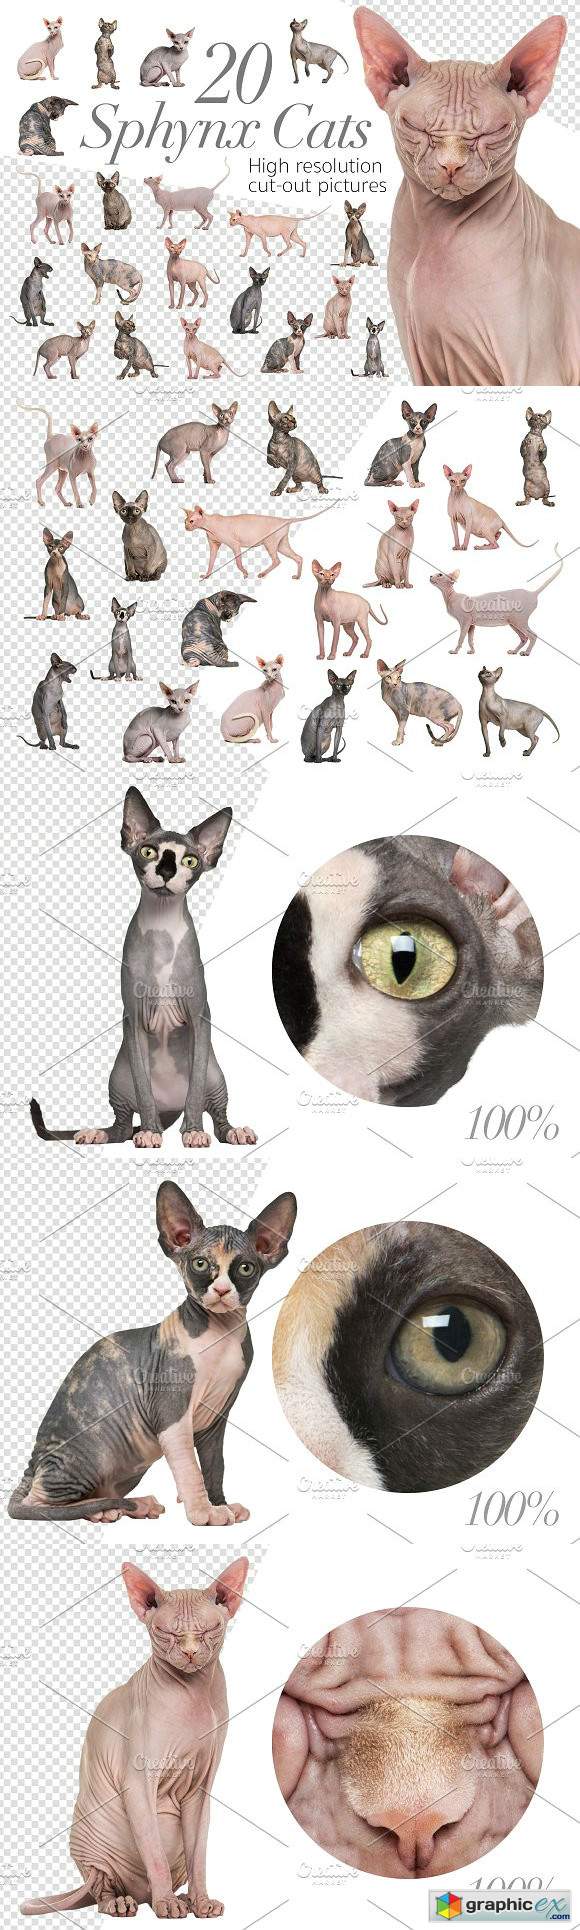 20 Sphynx Cats - Cut-out Pictures